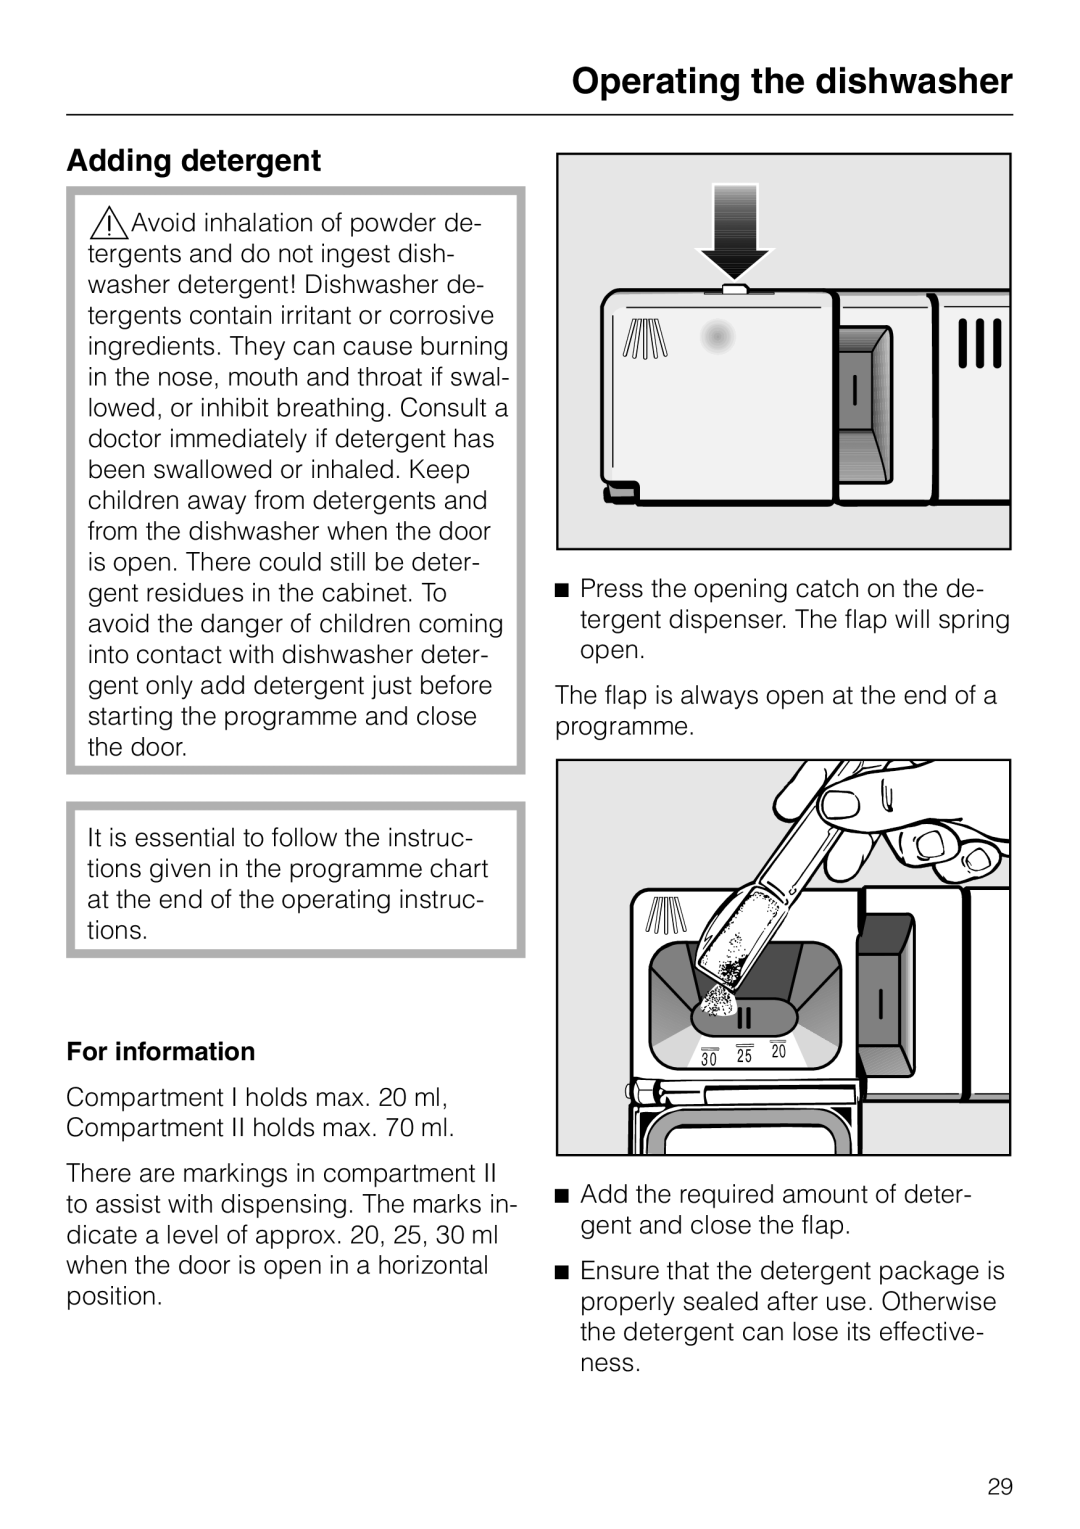 Miele dishwashers installation instructions Adding detergent, For information, Operating the dishwasher 